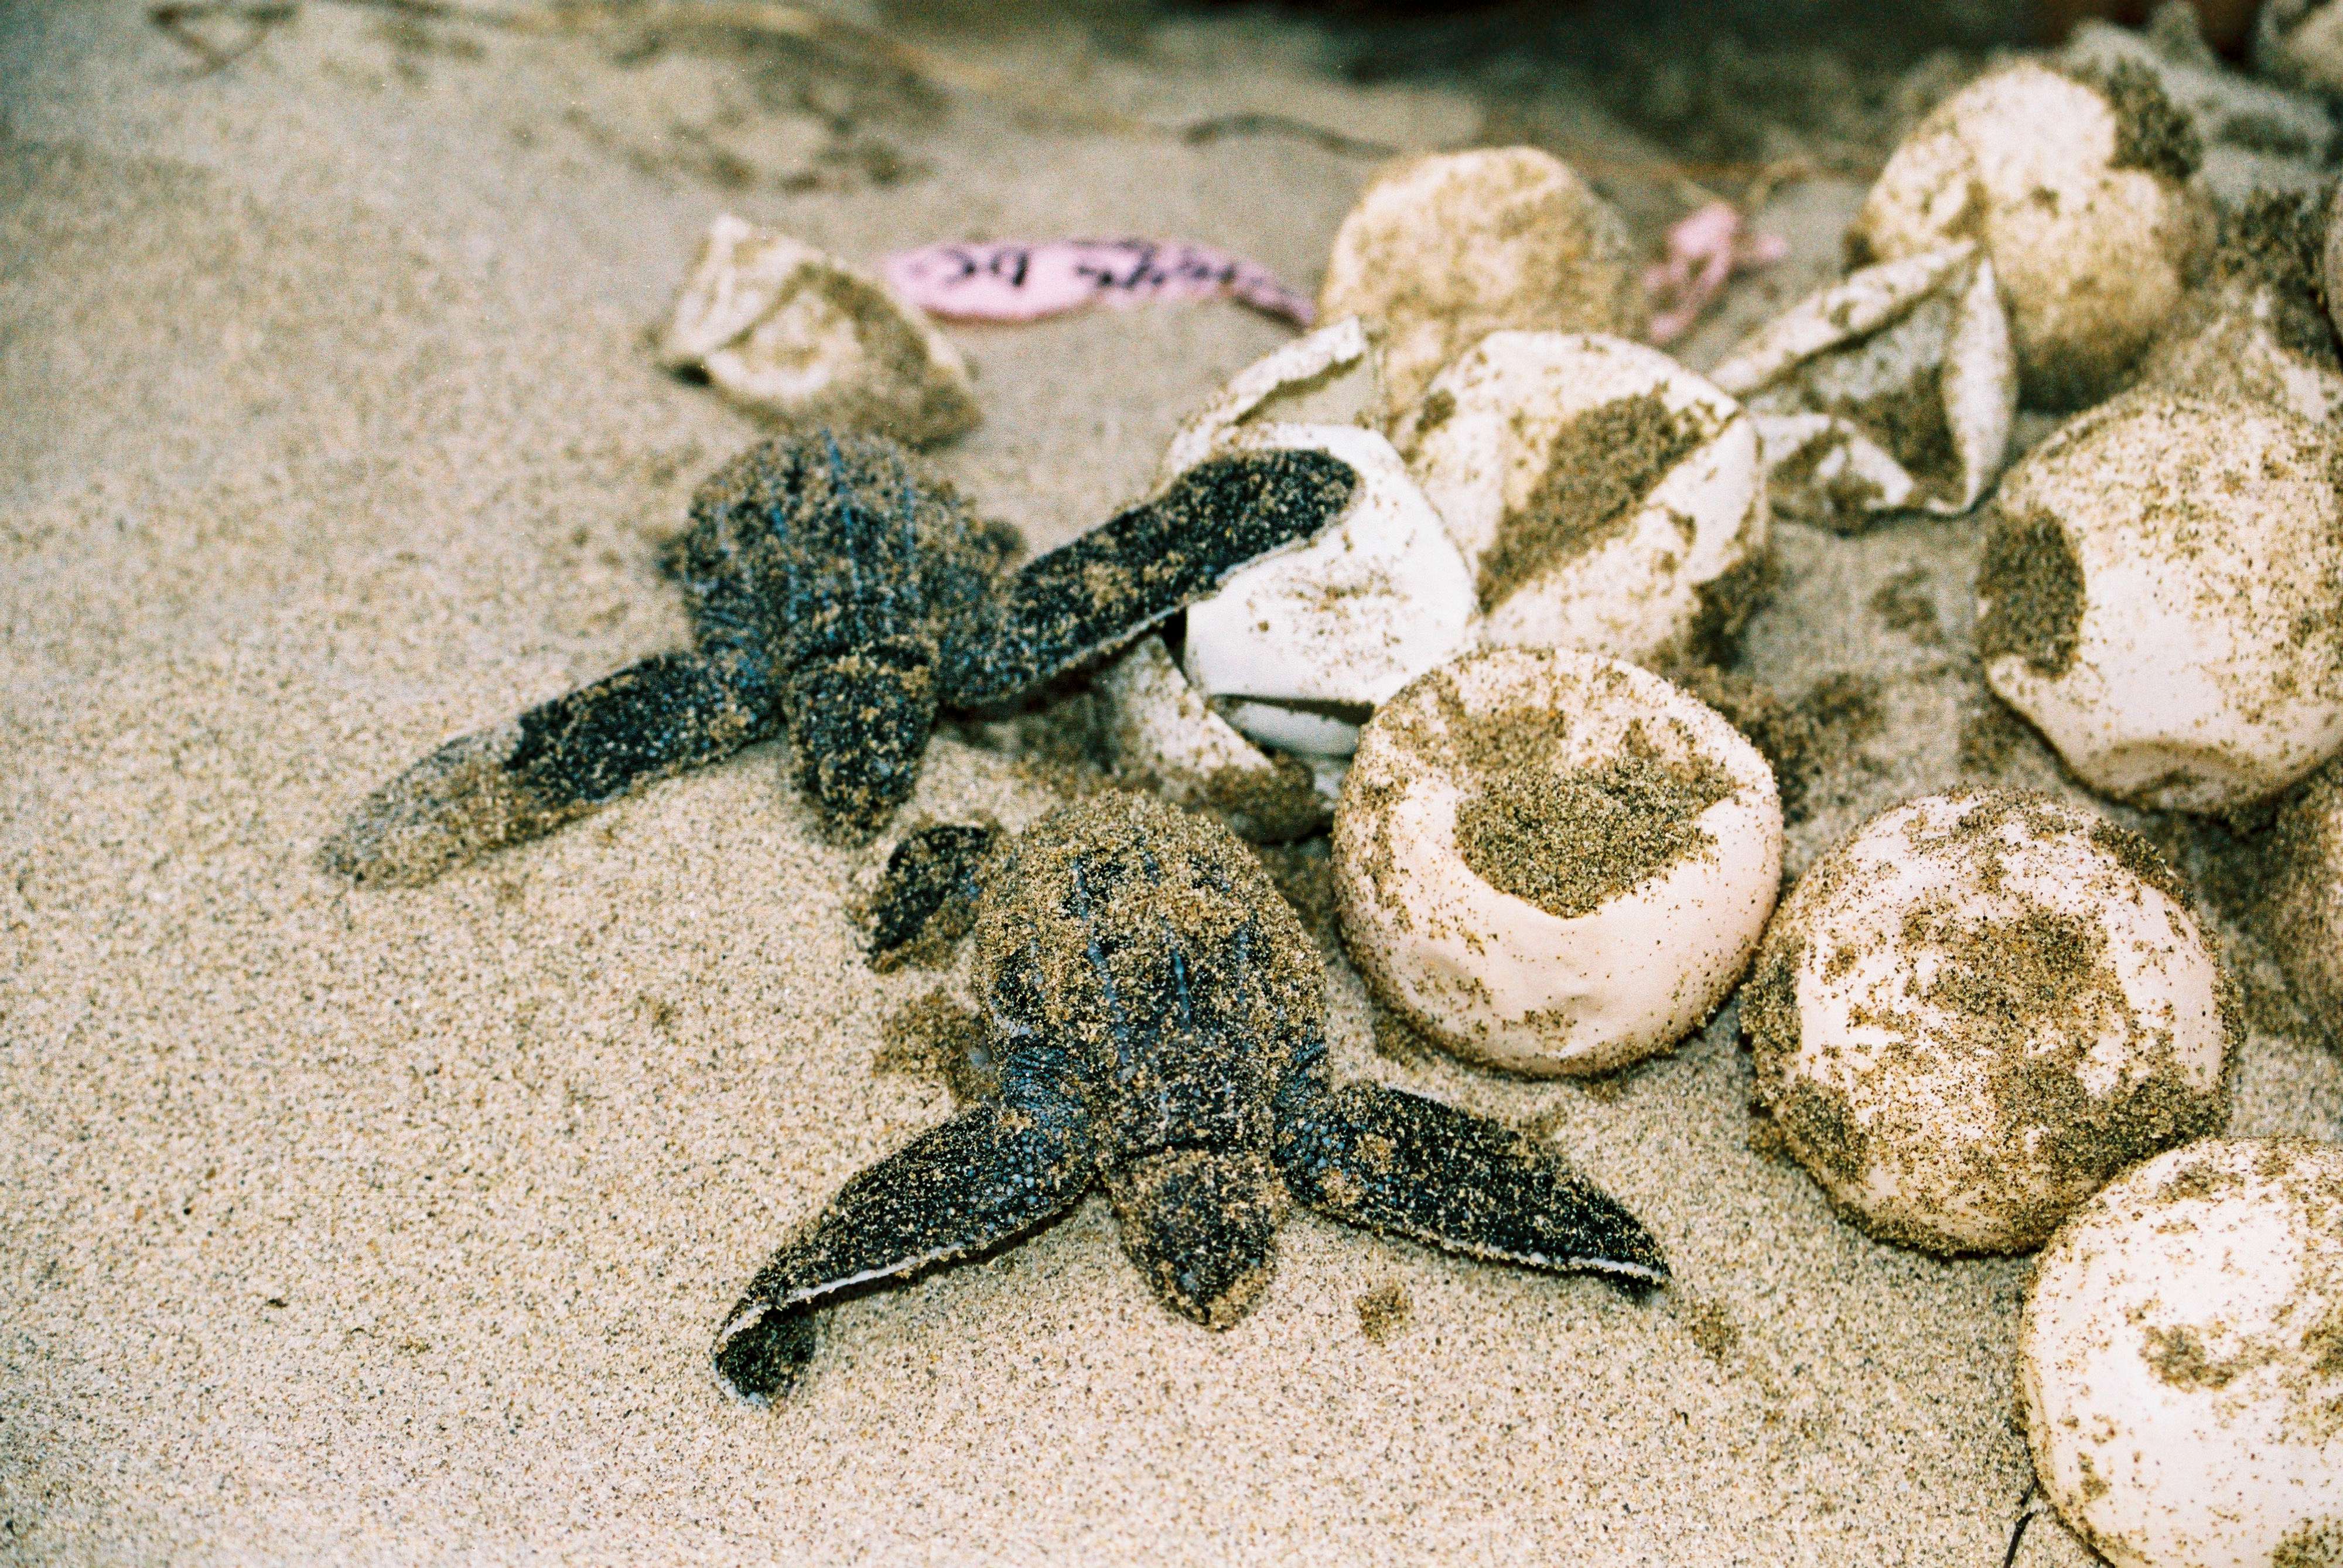 Leatherback turtle nest with hatchlings in Panama. © Tanya Peterson/WWF-Canon